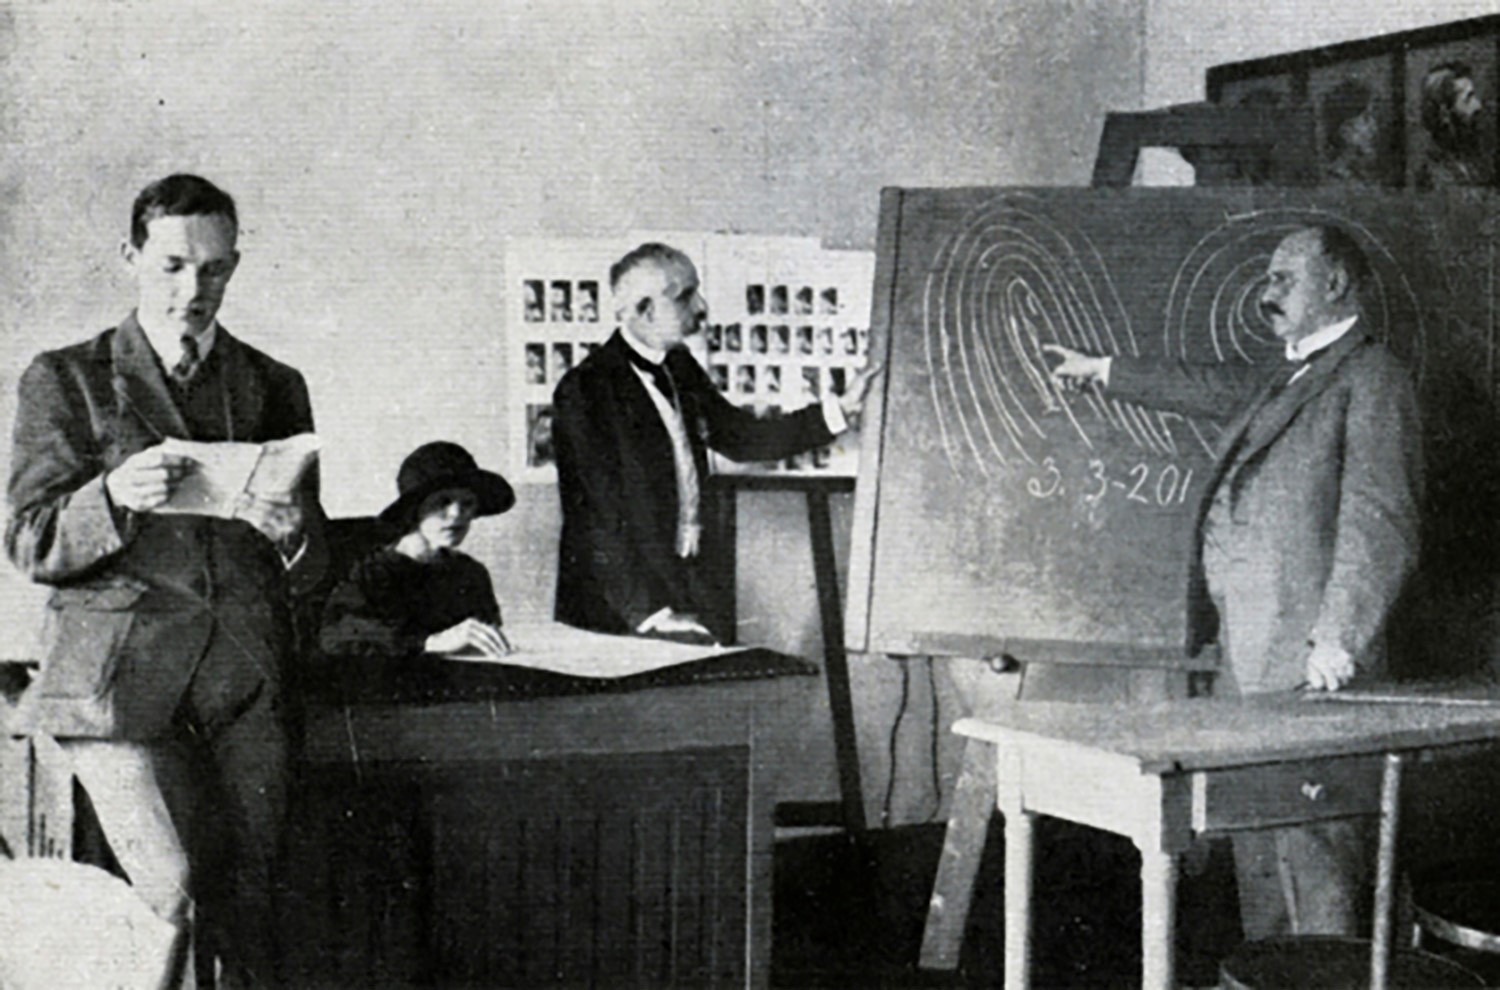 In the foreground, a man is reading a newspaper. In the background, a woman with a hat at a table and two men in front of a blackboard. Images of fingerprints are drawn on the board.